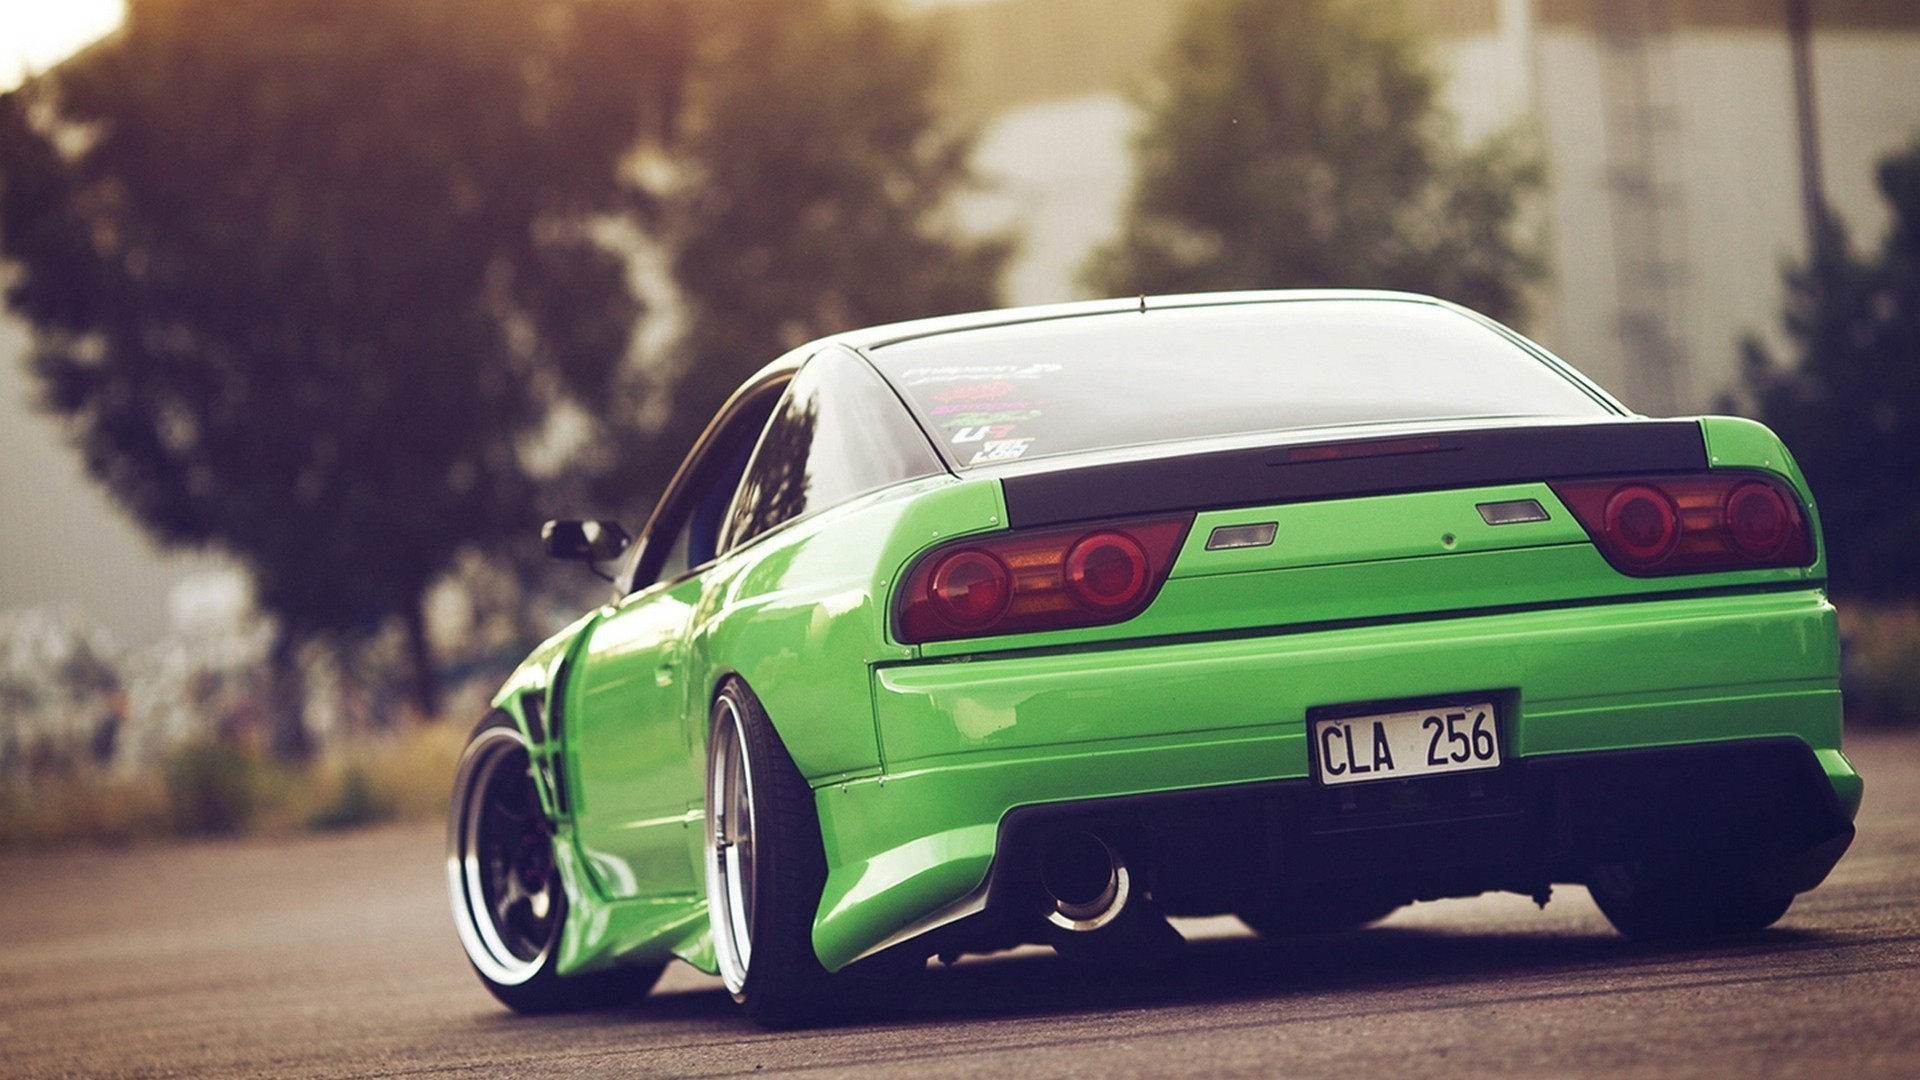 Nissan, 240sx, Green, JDM, Car, Stance Wallpapers HD \/ Desktop and Mobile Backgrounds